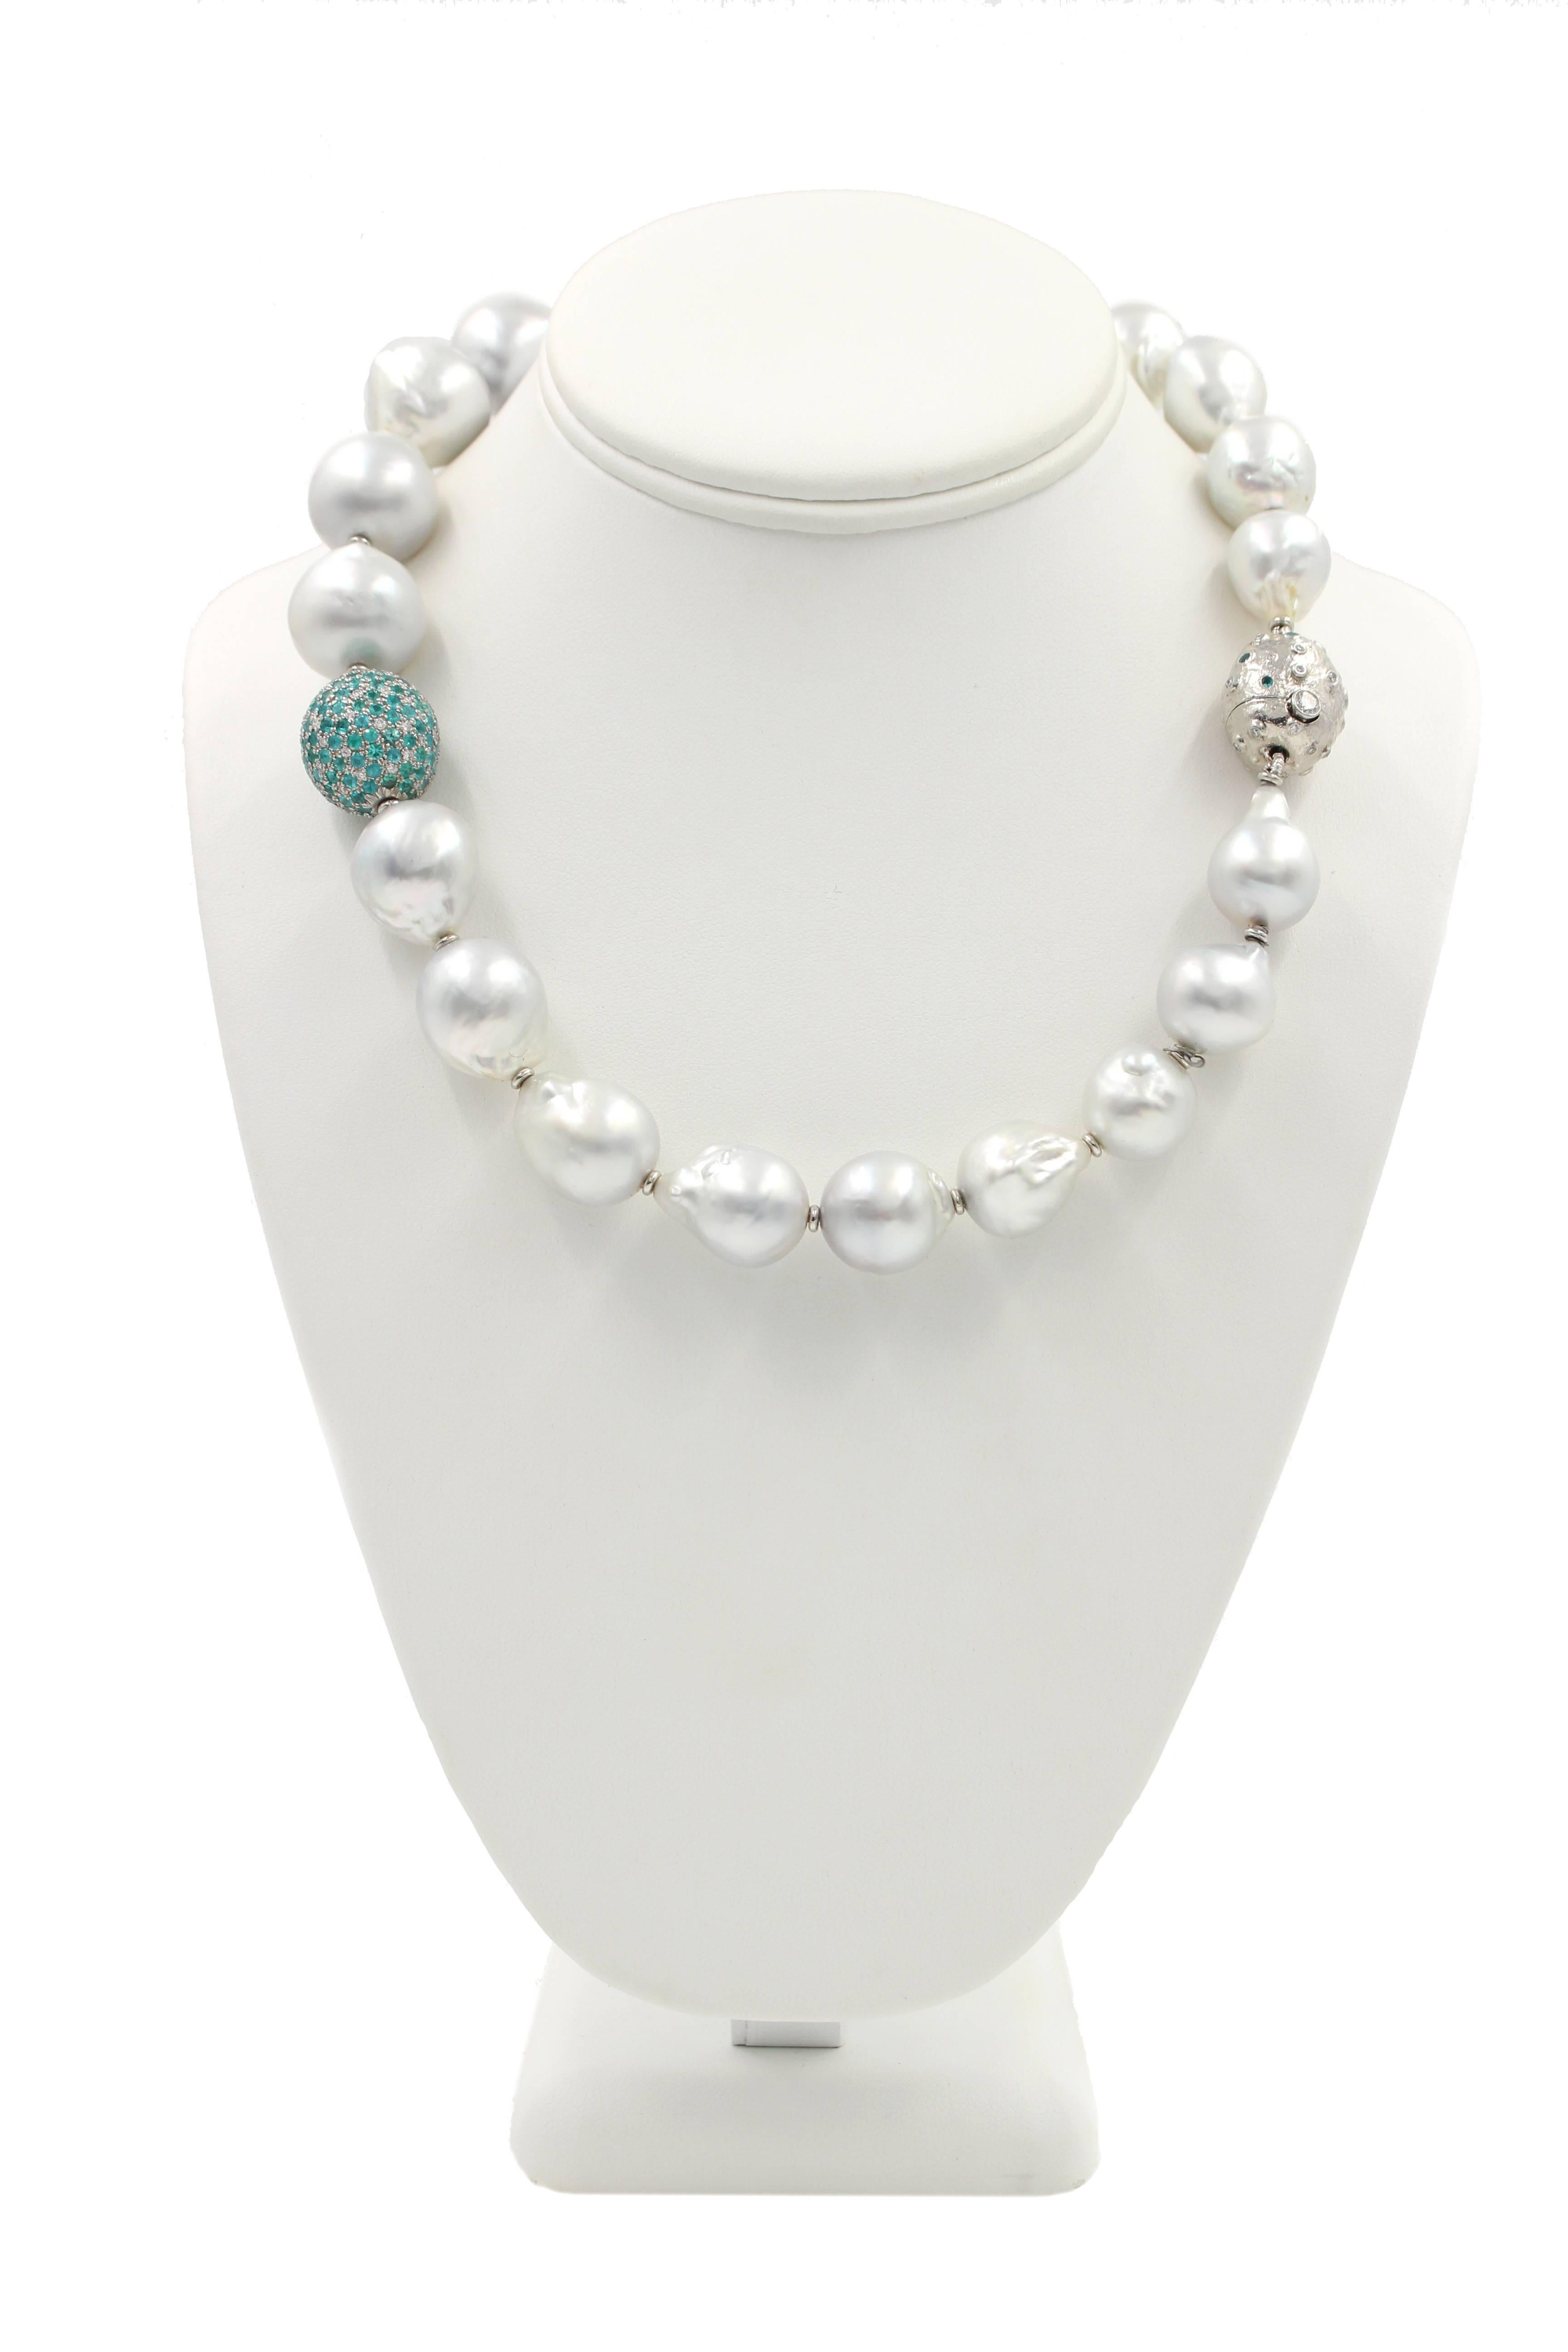 The Spectacular Necklace with South Sea Pearls, Paraiba Tourmalines, Diamonds In New Condition For Sale In Santa Fe, NM